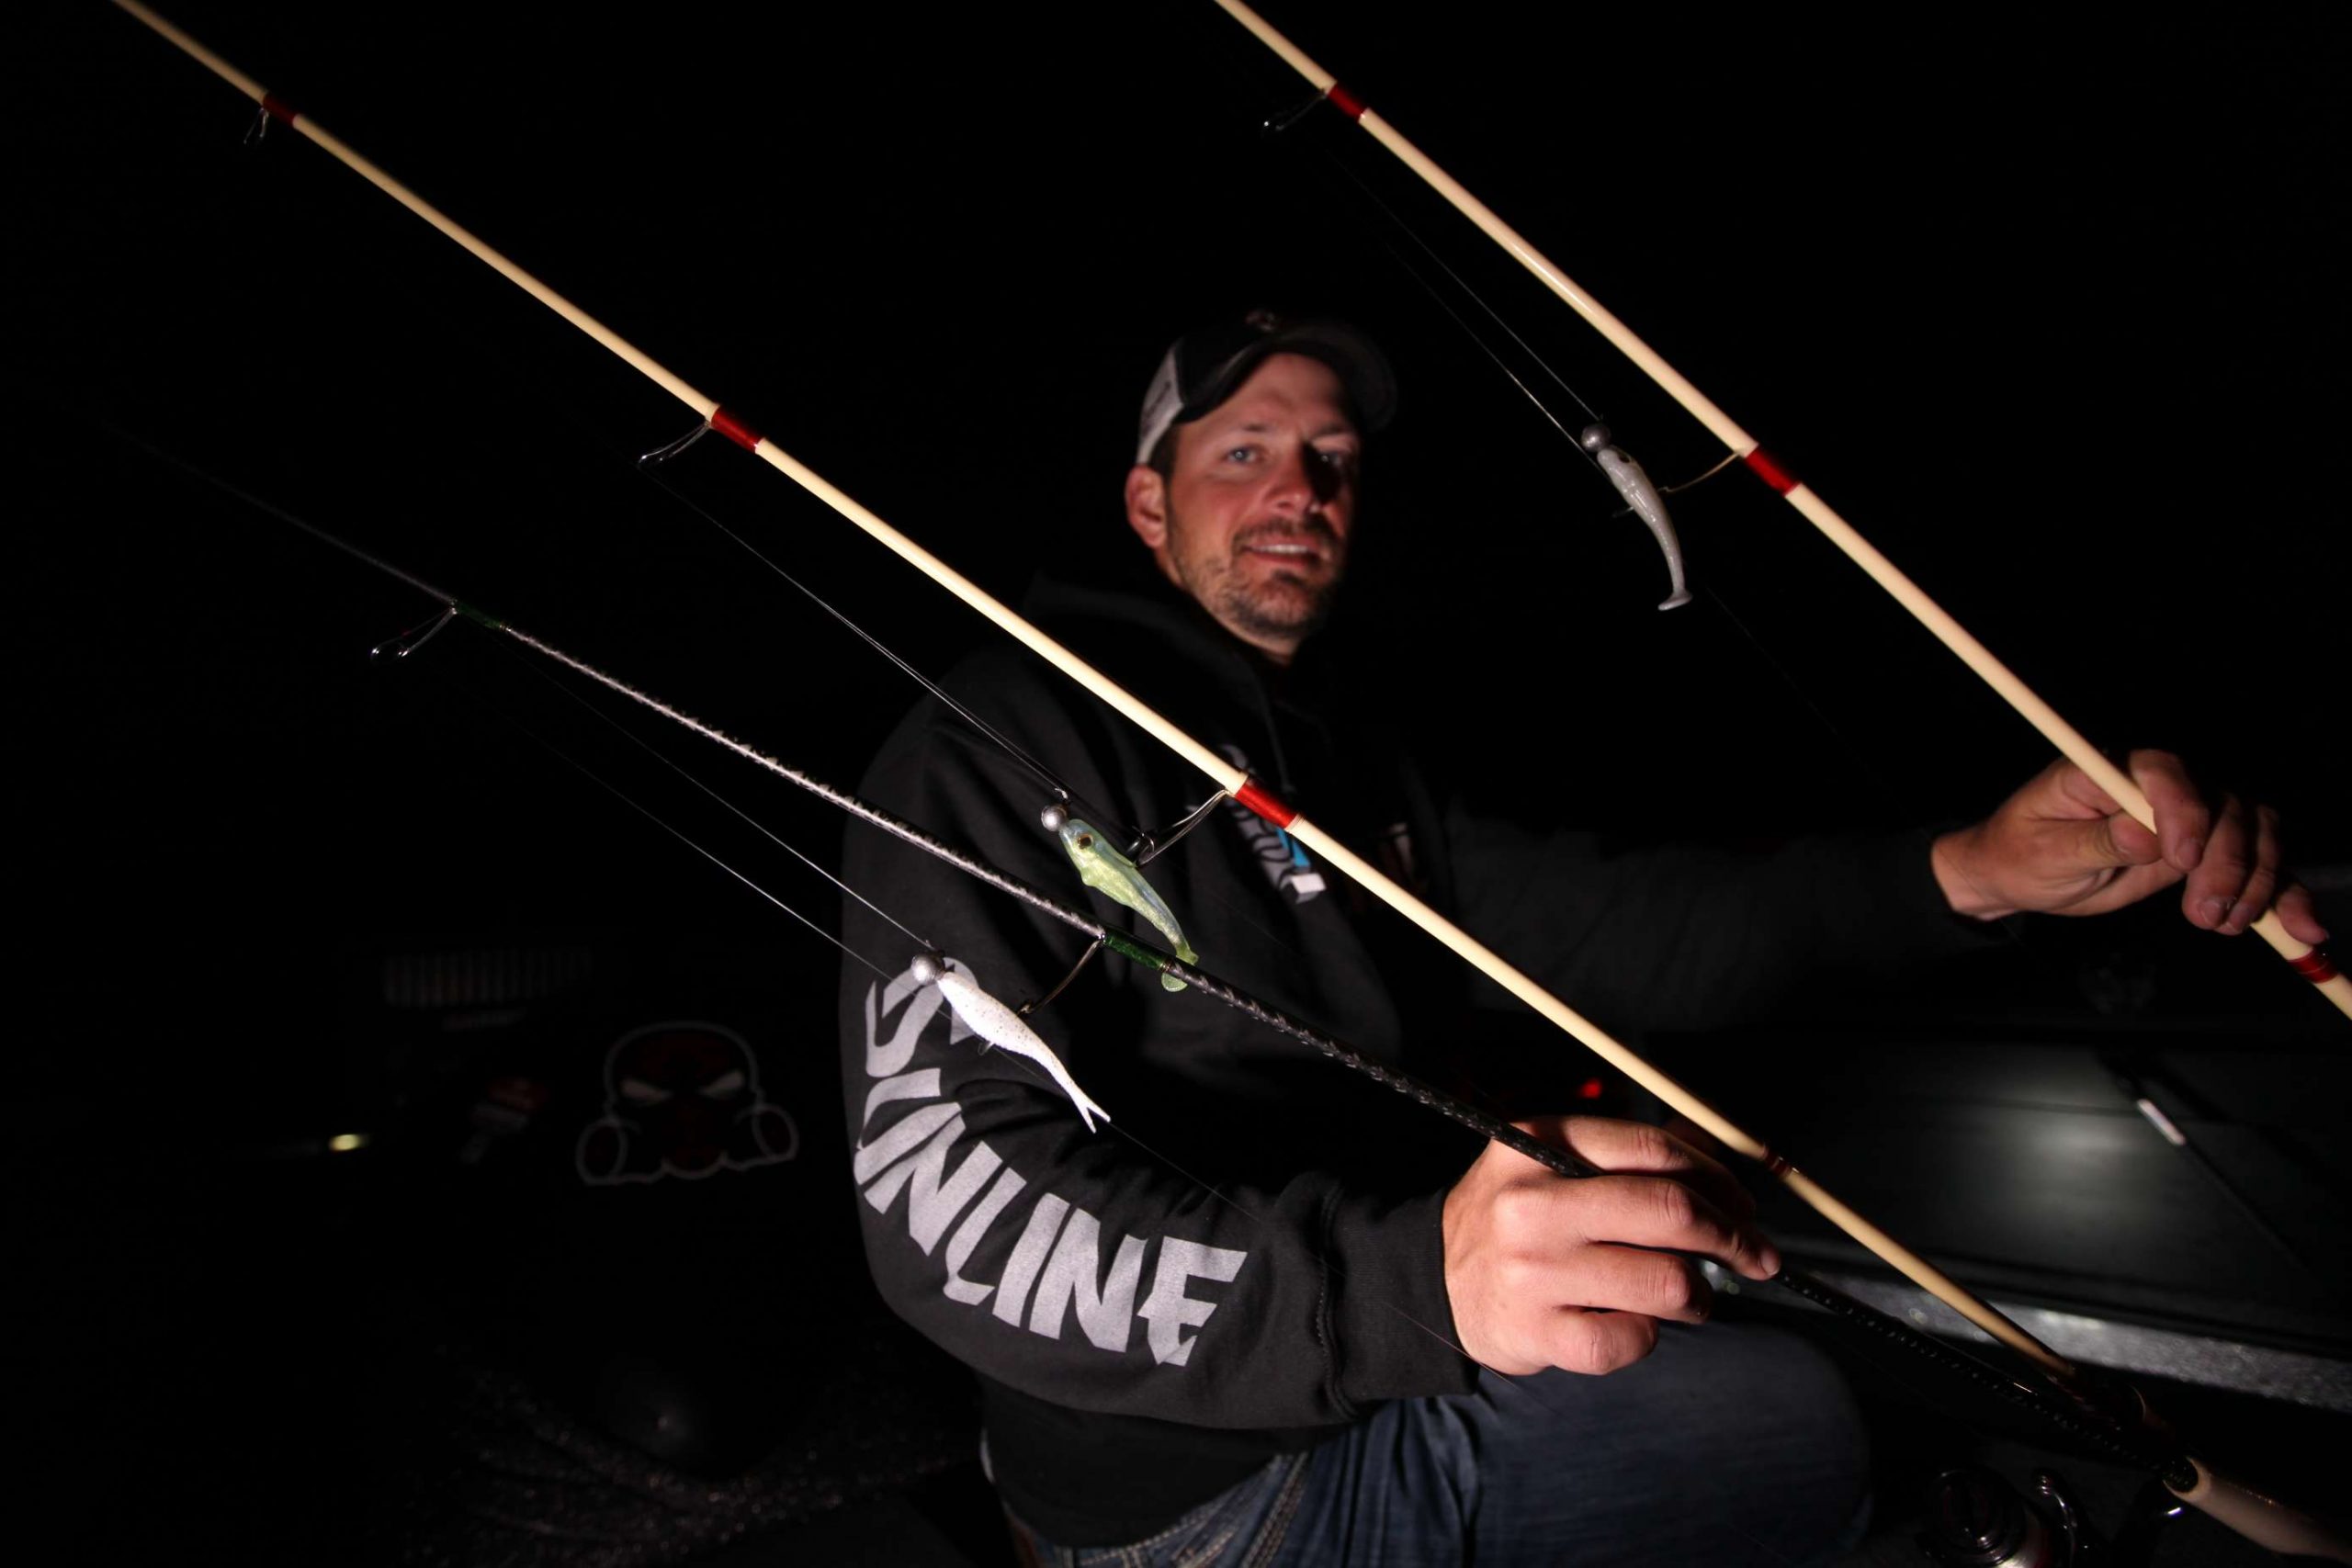 <b>David Mullins</b><br> The seventh place finisher chose baits of his own design to catch smallmouth. Mullins used hand-poured 3/8-ounce screw lock jig heads for each rig. From the bottom up, you see an unnamed fluke-style bait, and then a duo of 3-inch swimbaits made for him by Scottsboro Tackle Co. The middle bait is chartreuse and at top is his favorite, the Mullins Madness pattern. Mullins video game fished for smallmouth using a vertical presentation. 